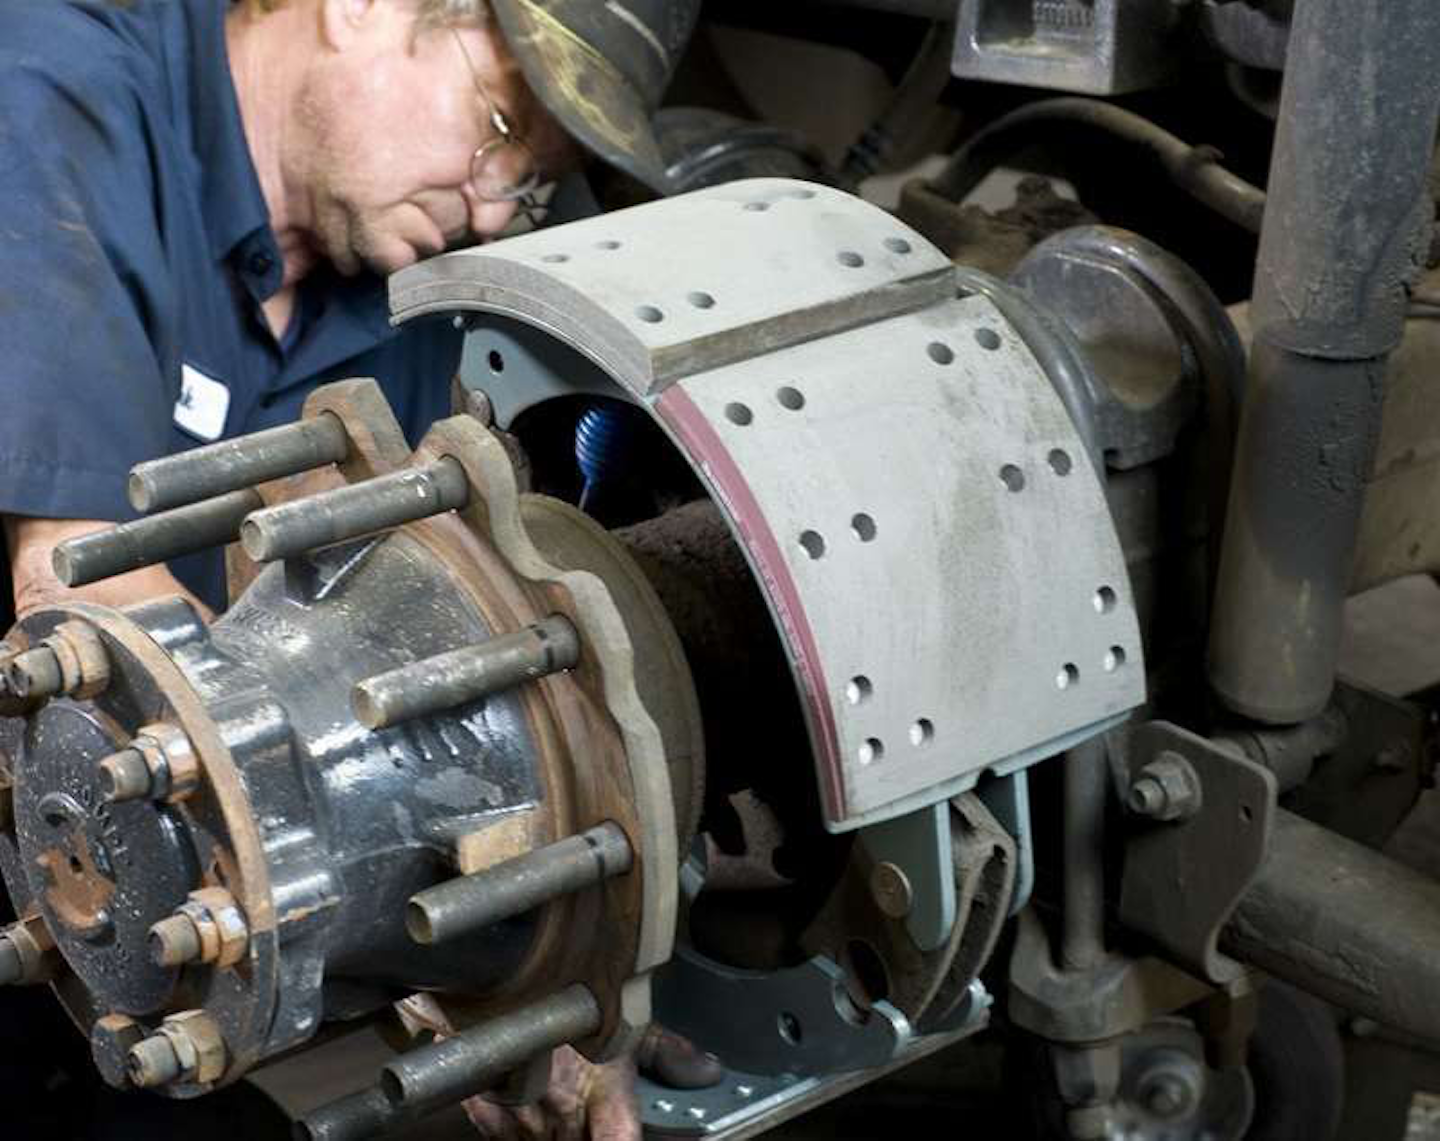 Bendix gives tips for improving Scam brake performance and life